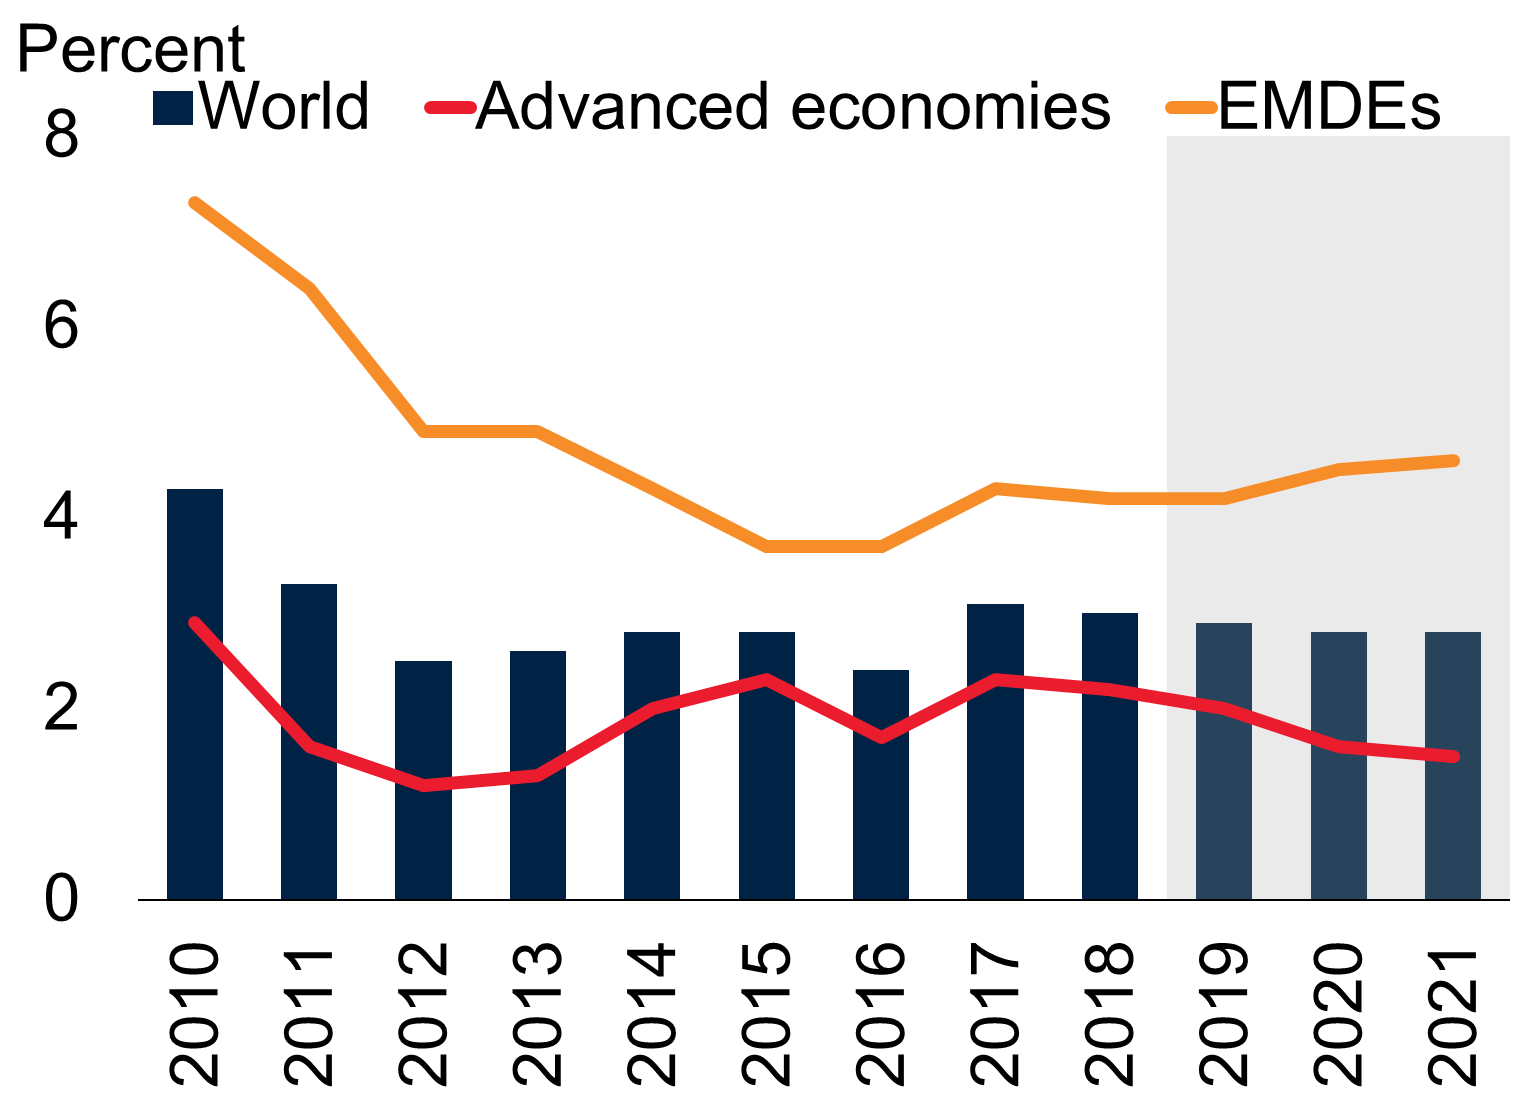 Actual and forecasted global growth for the world (bars), advanced economies (red line) and emerging markets and developing countries (orange line) from 2010 to 2021 (source: World Bank)